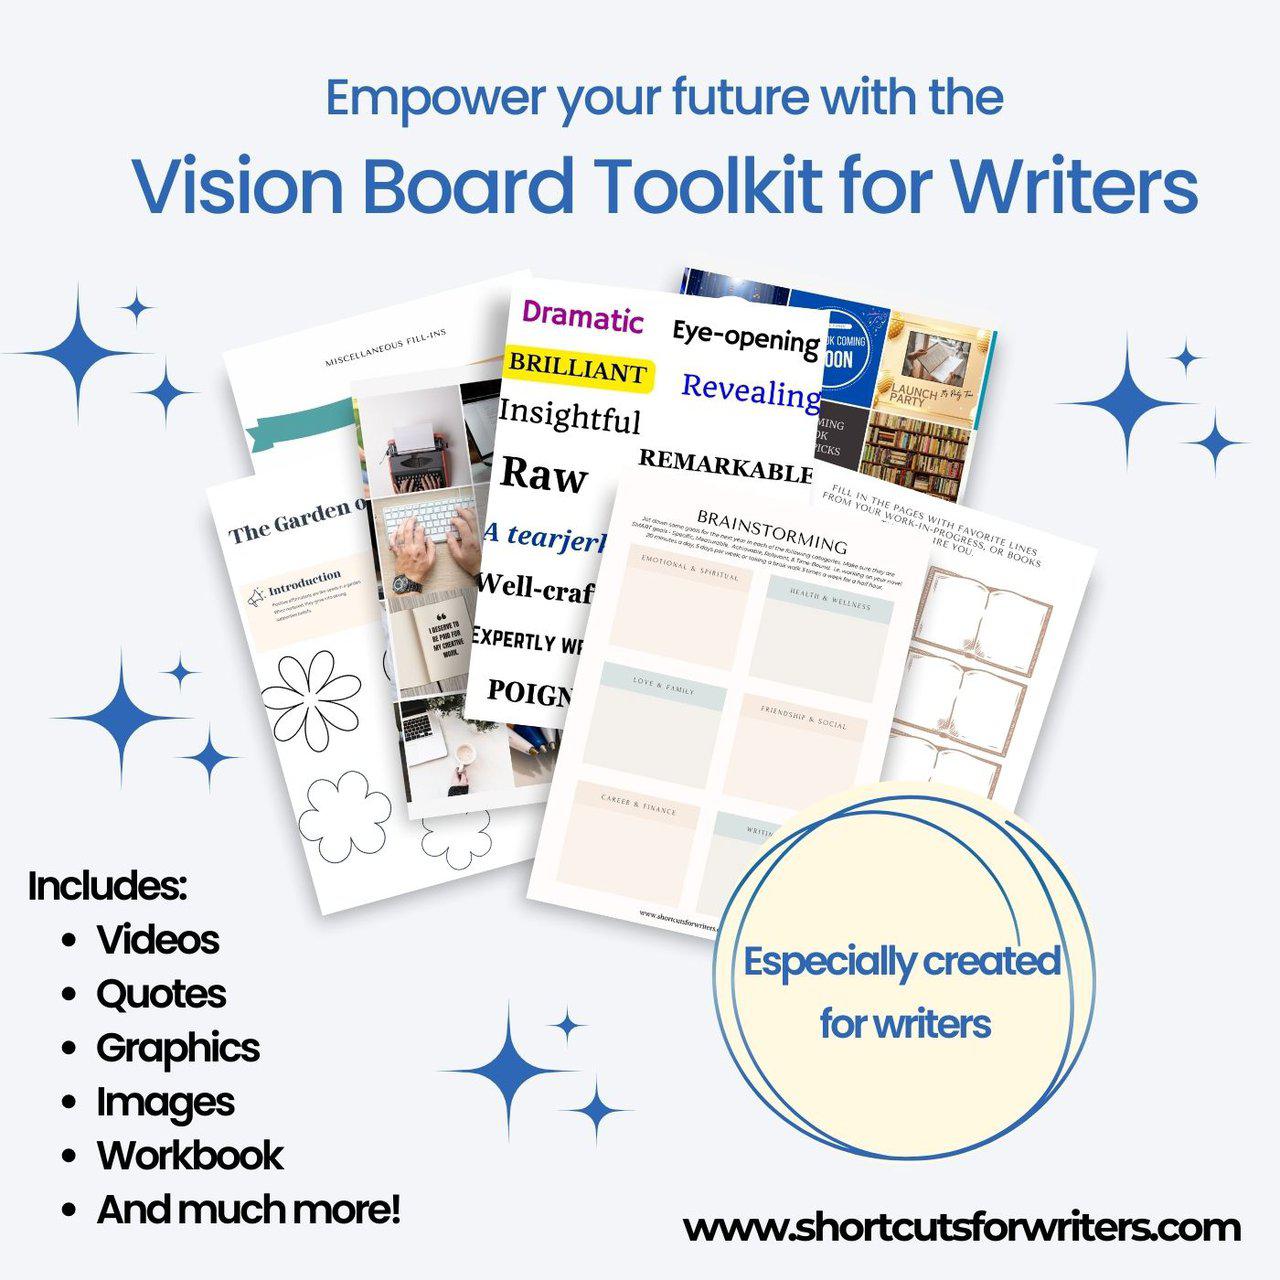 Vision Board Toolkit for Writers by Stacy Juba